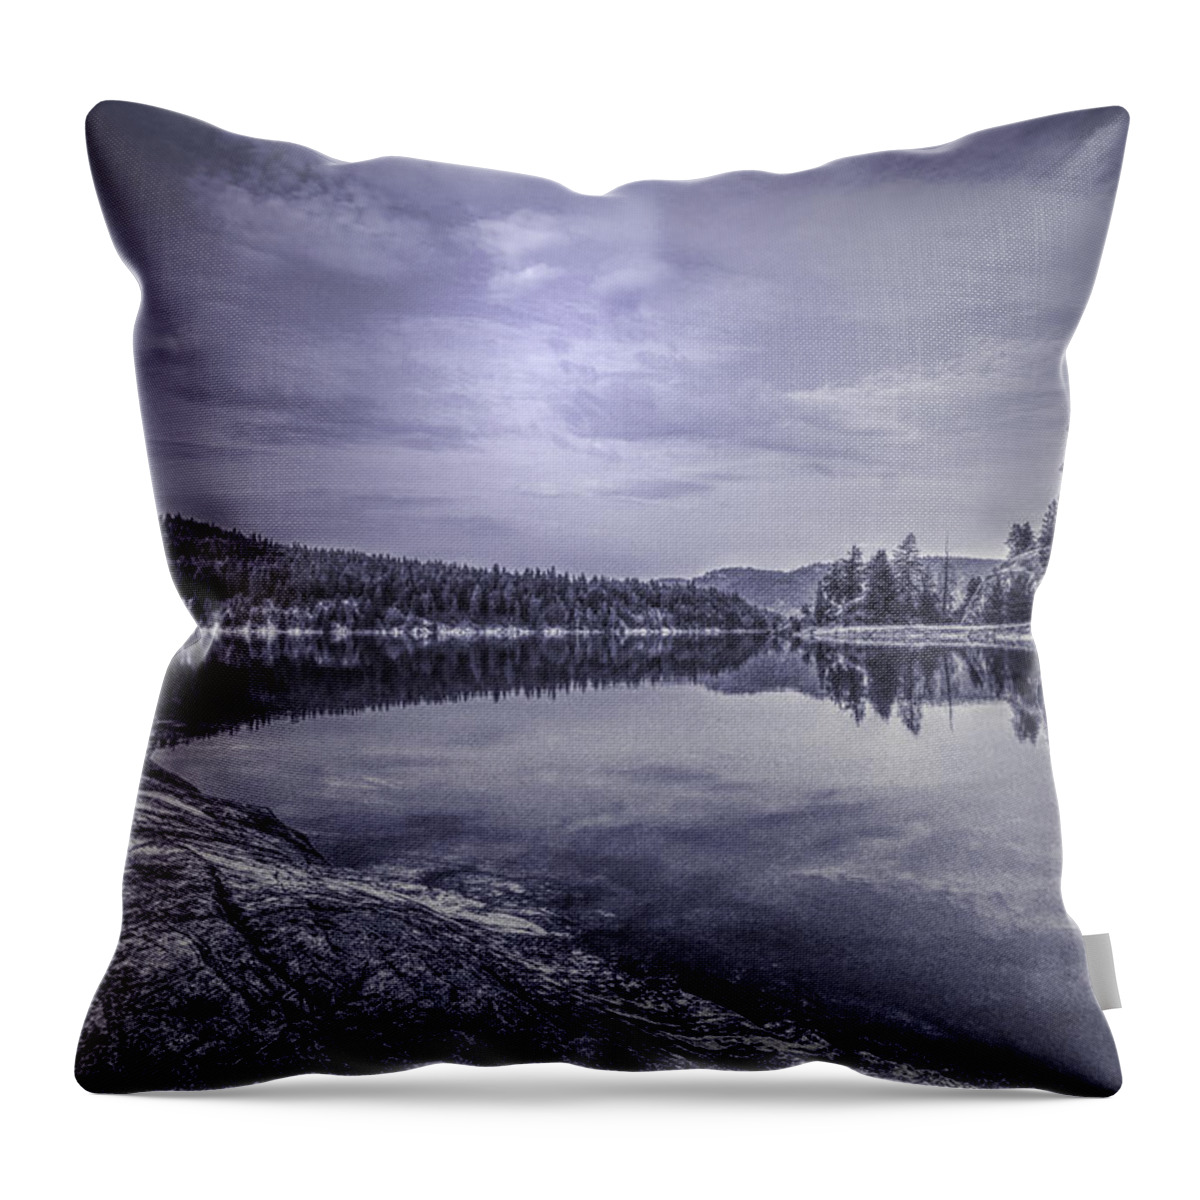 China Bend Throw Pillow featuring the photograph China Bend2 by Loni Collins